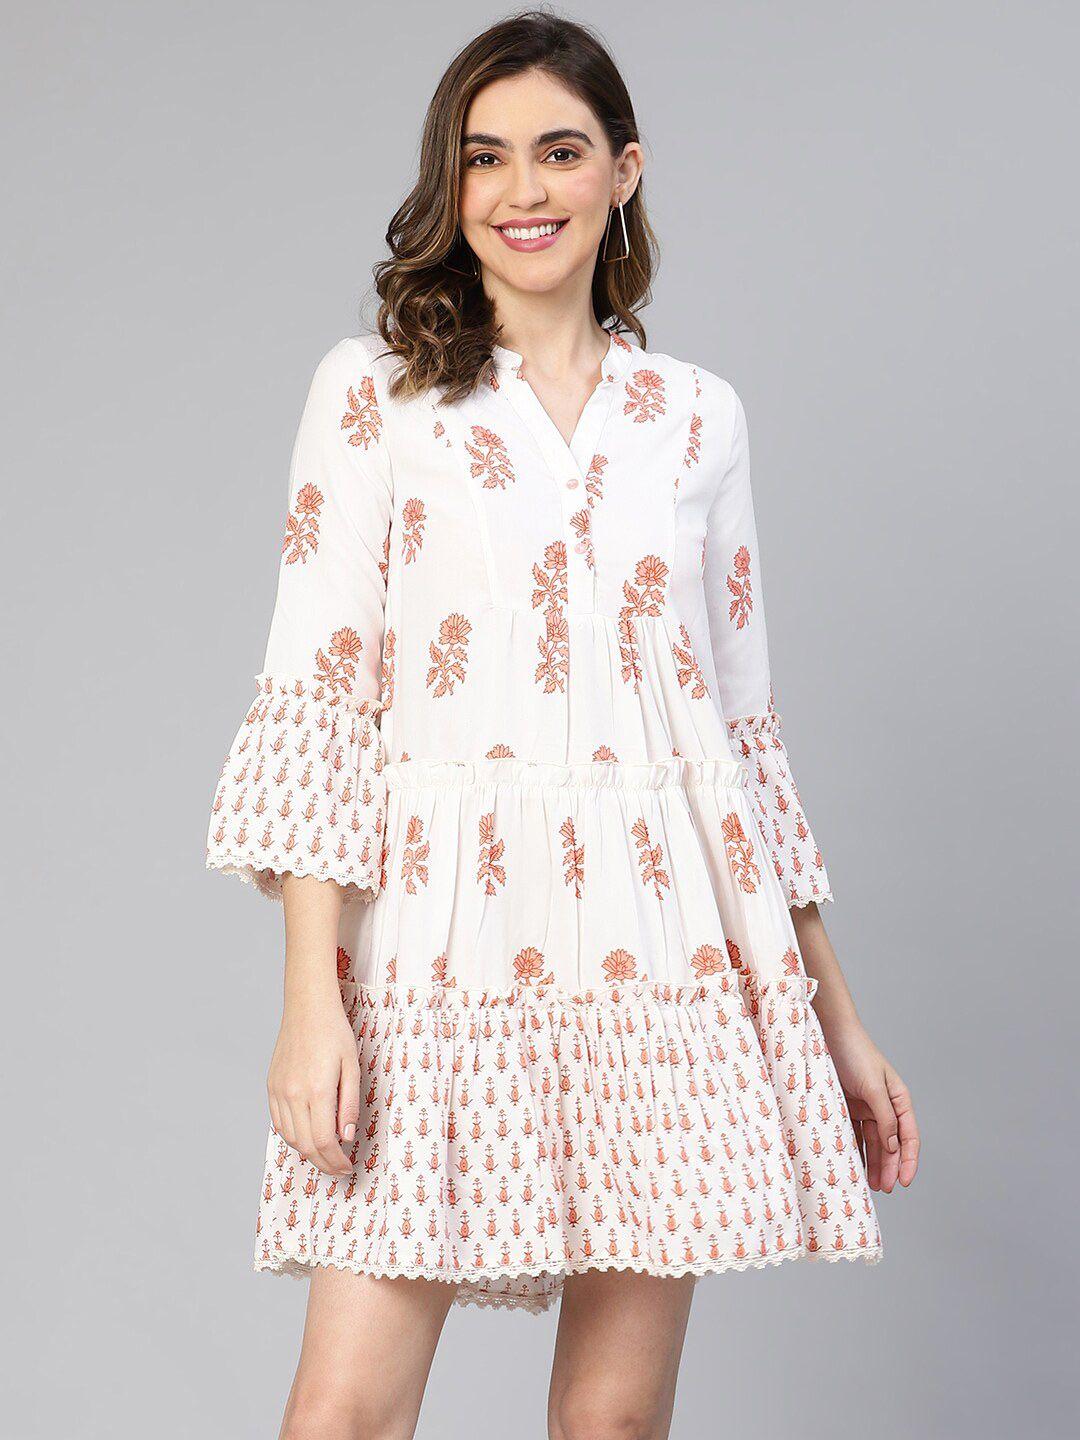 oxolloxo ethnic print bell sleeve lace detail a-line dress